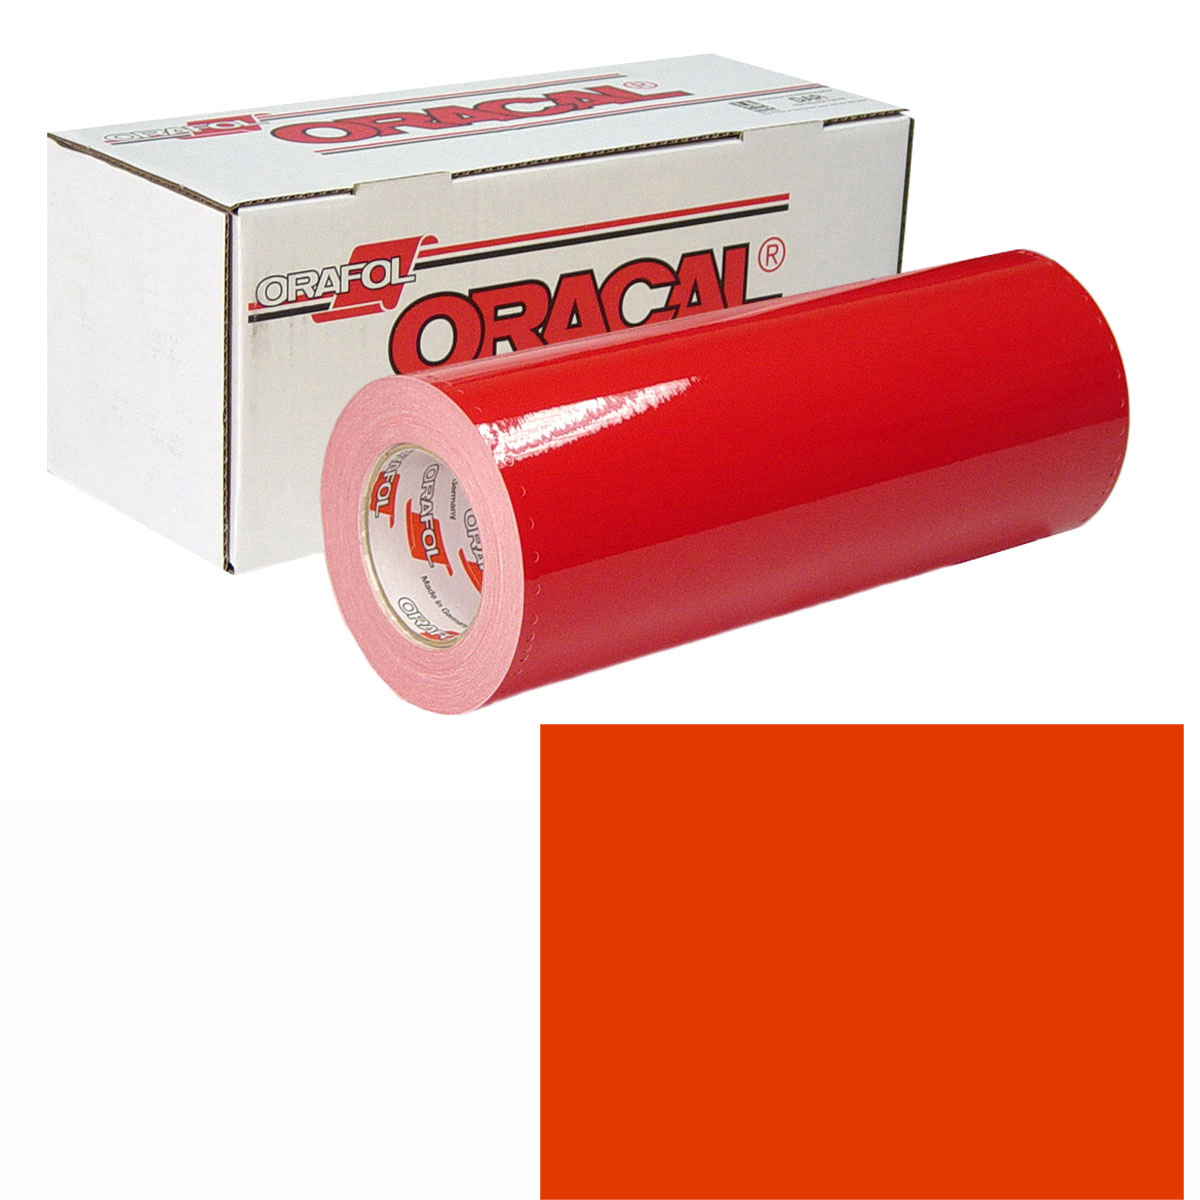 ORACAL 951 30in X 50yd 335 Mars Red